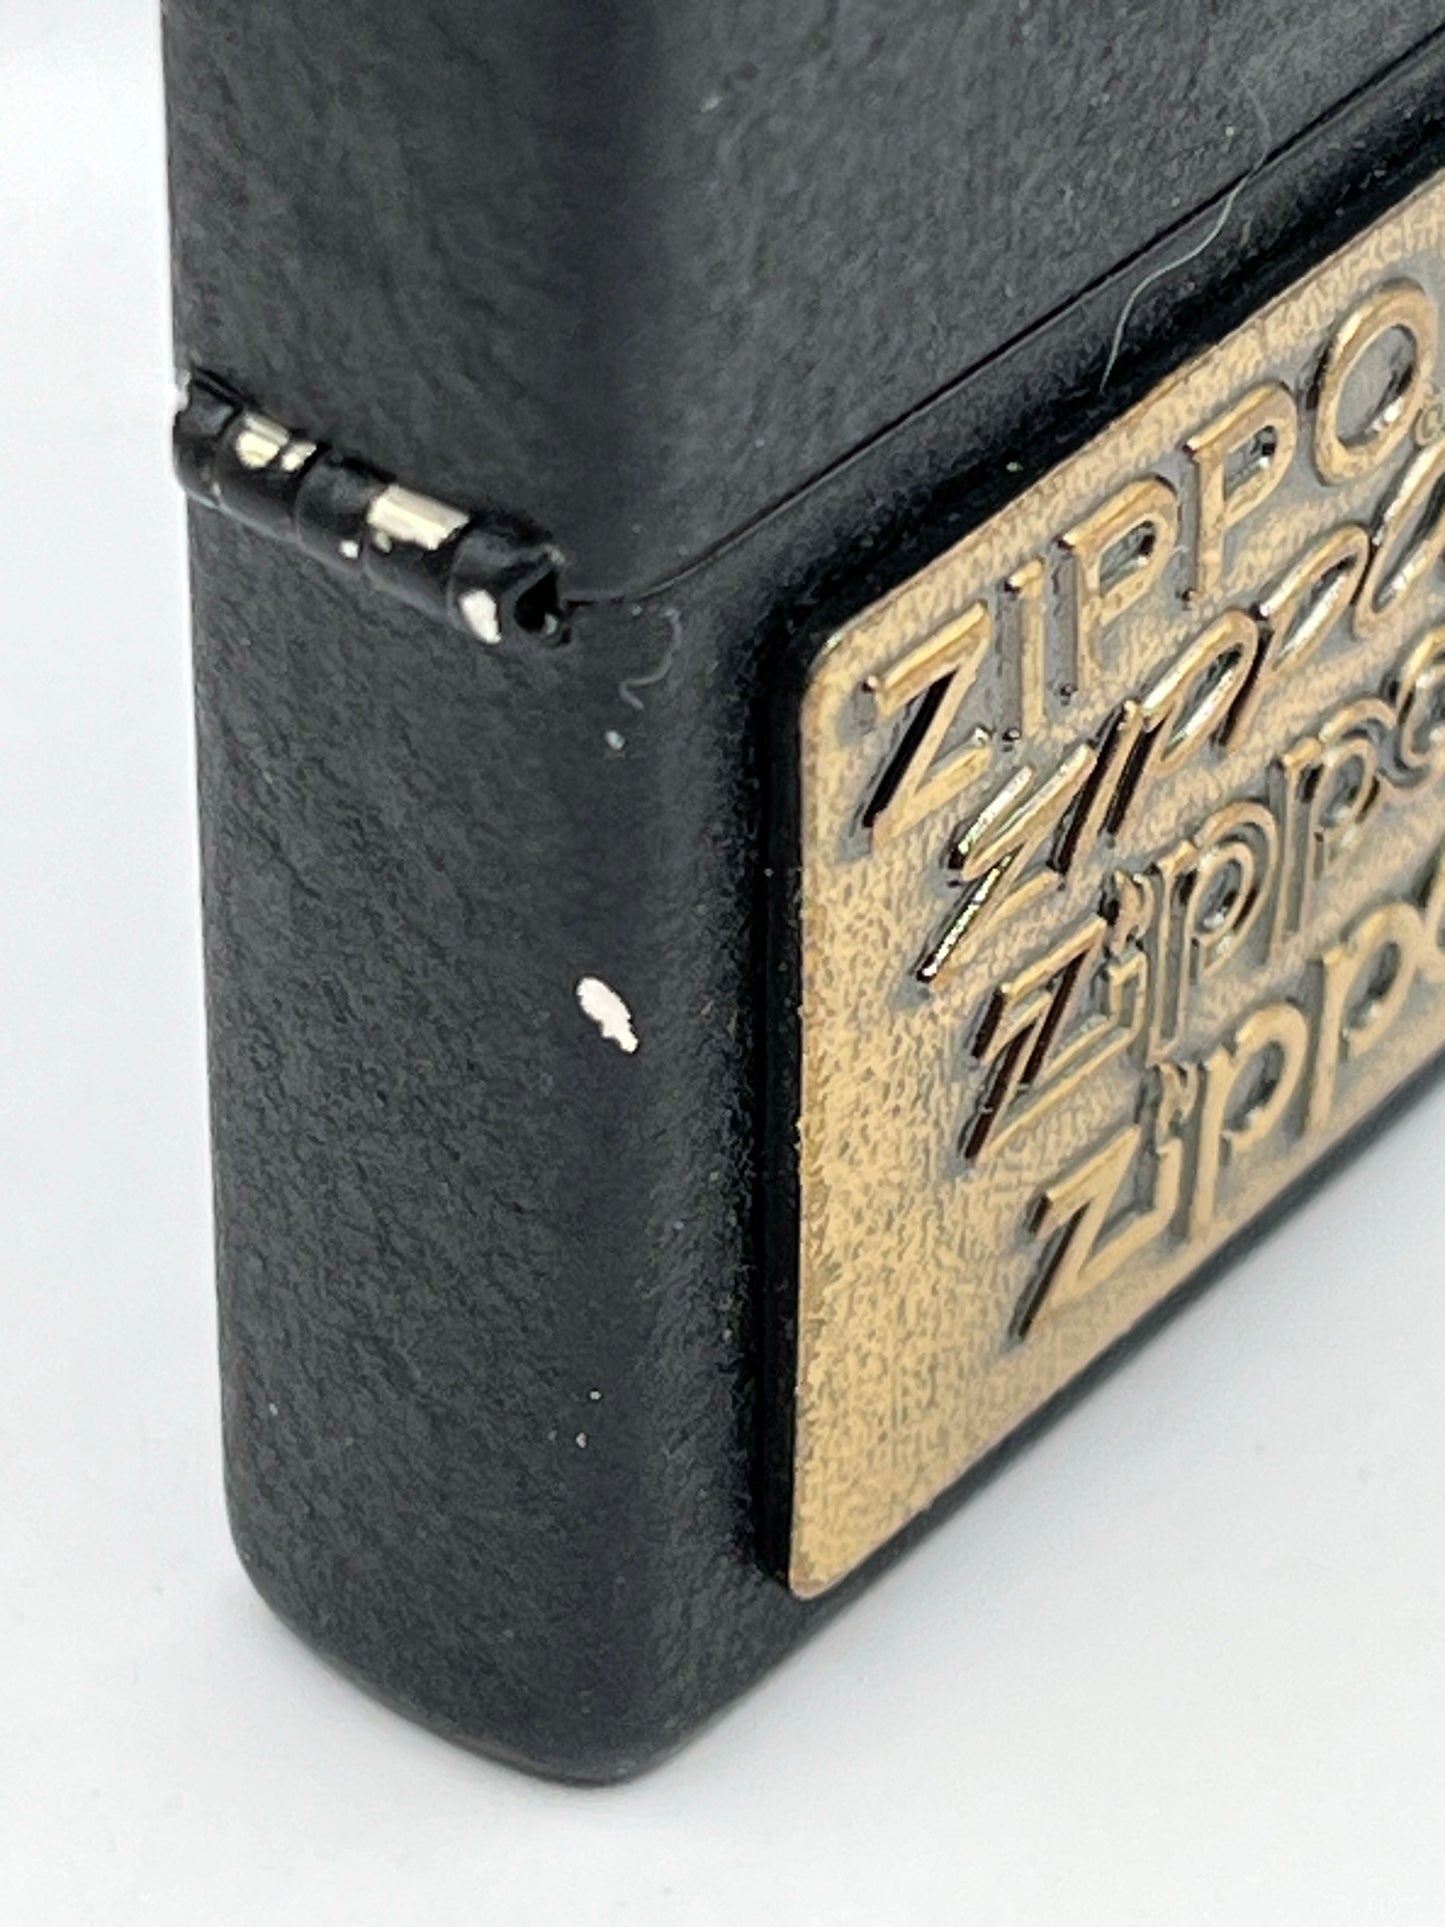 1999 Zippo logos #362 Zippo Brass Emblem on Black Crackle Bradford stamped but with correct year Niagara Falls stamped insert unfired.